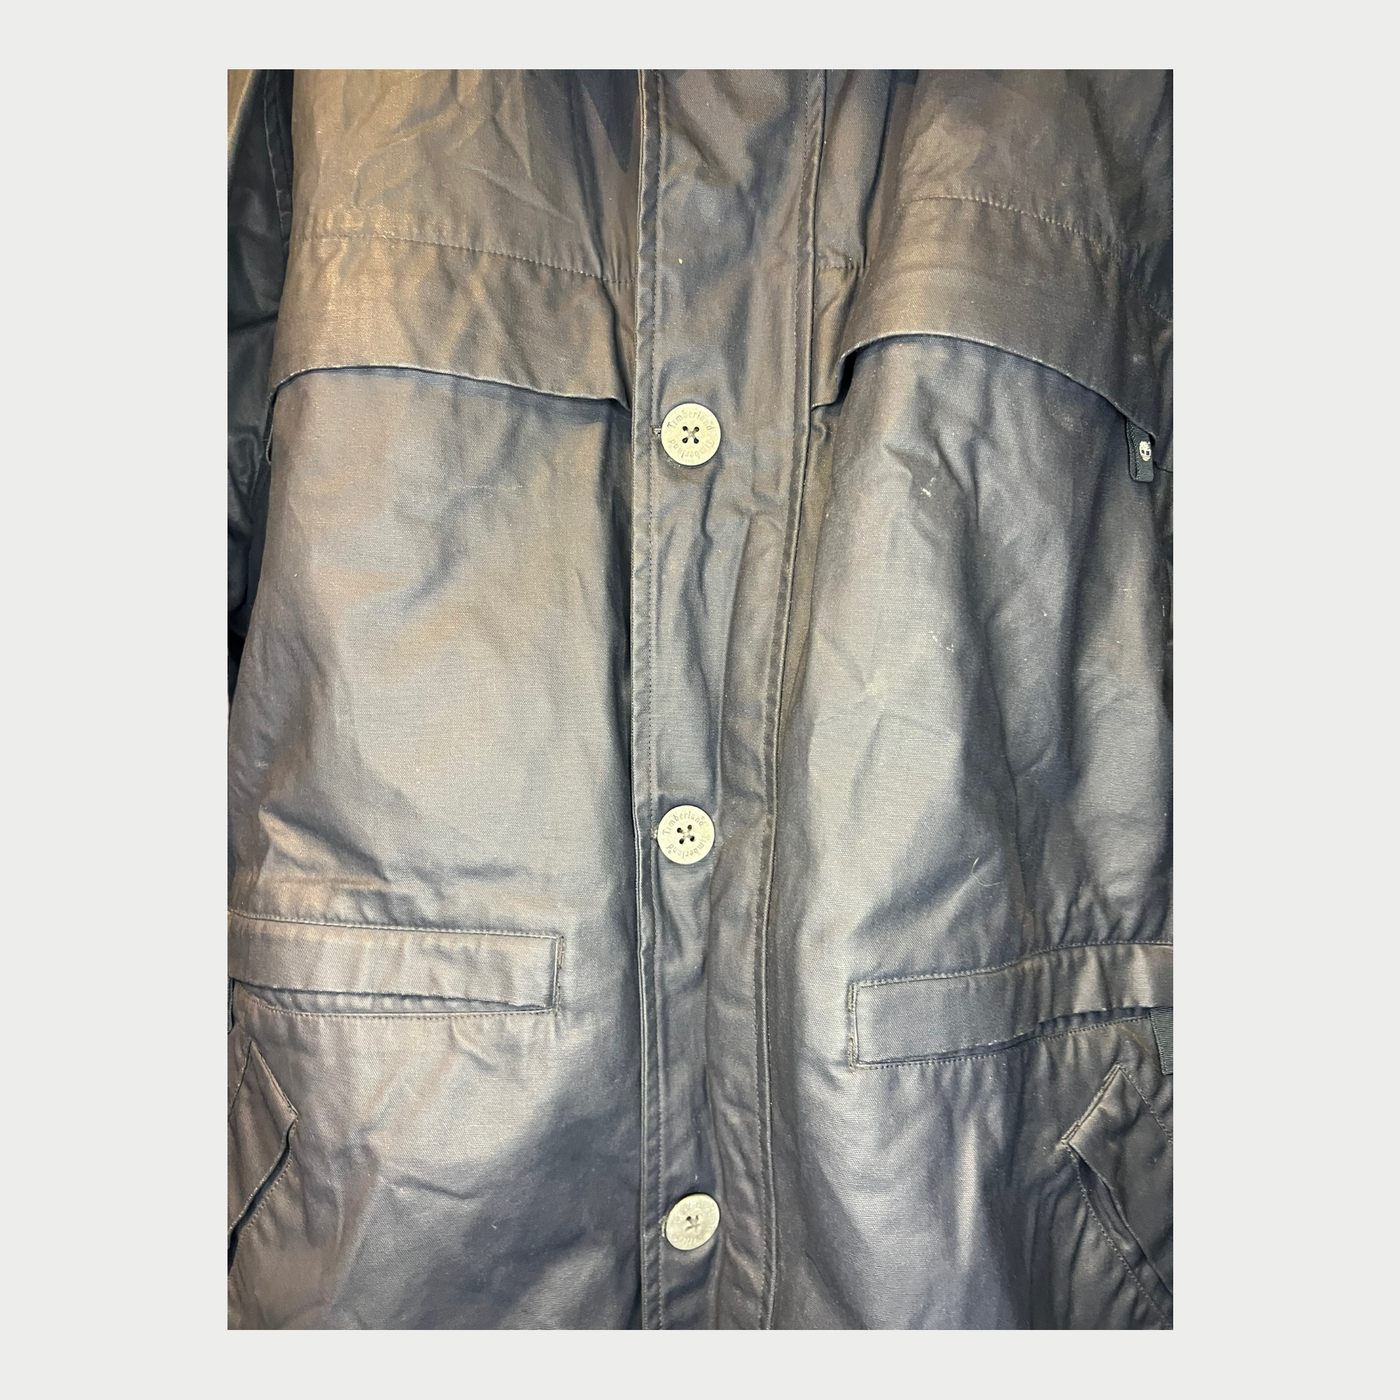 Vintage Adventure Jacket From Timberland Close-up